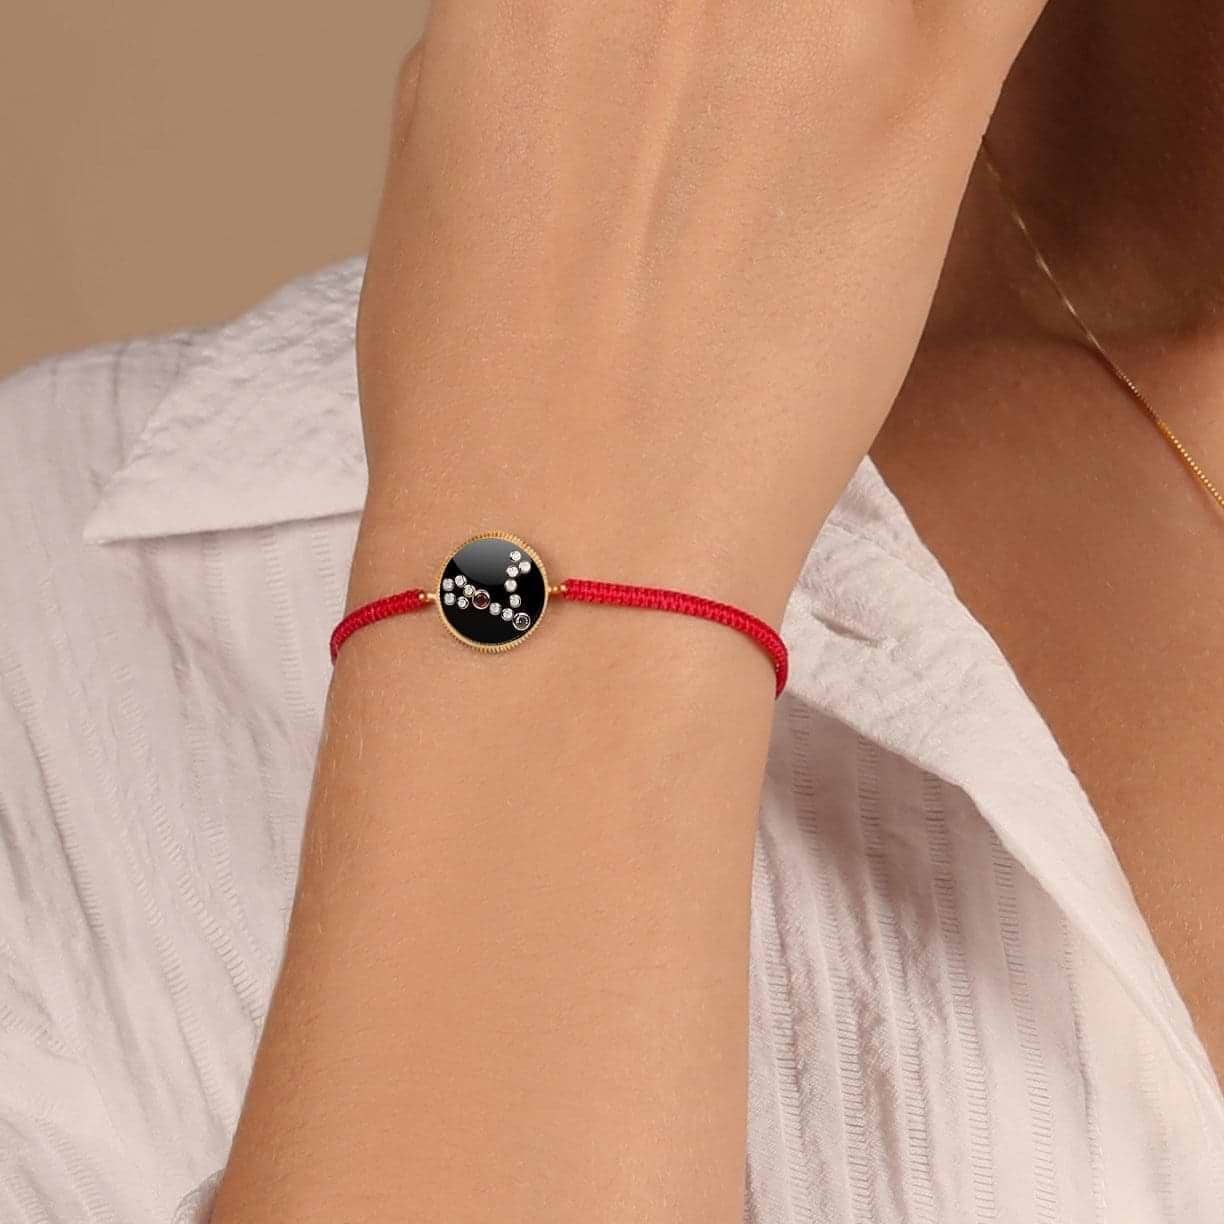 Karma and Luck  Bracelet  -  The One Who Dreams - Pisces Constellation Red String Bracelet